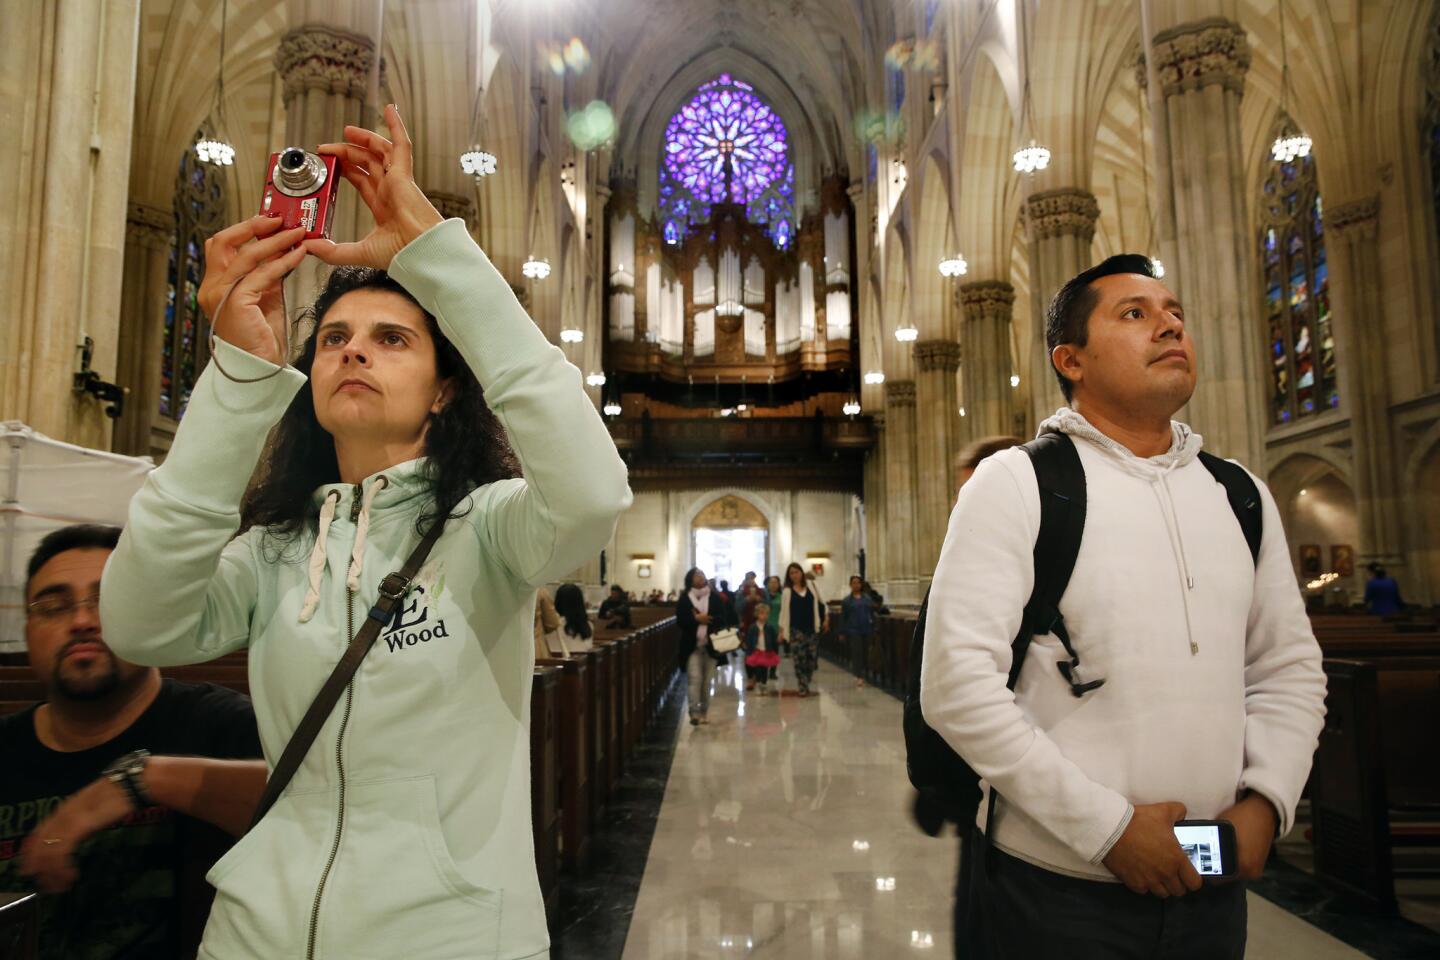 New York's St. Patrick's Cathedral prepares for arrival of Pope Francis